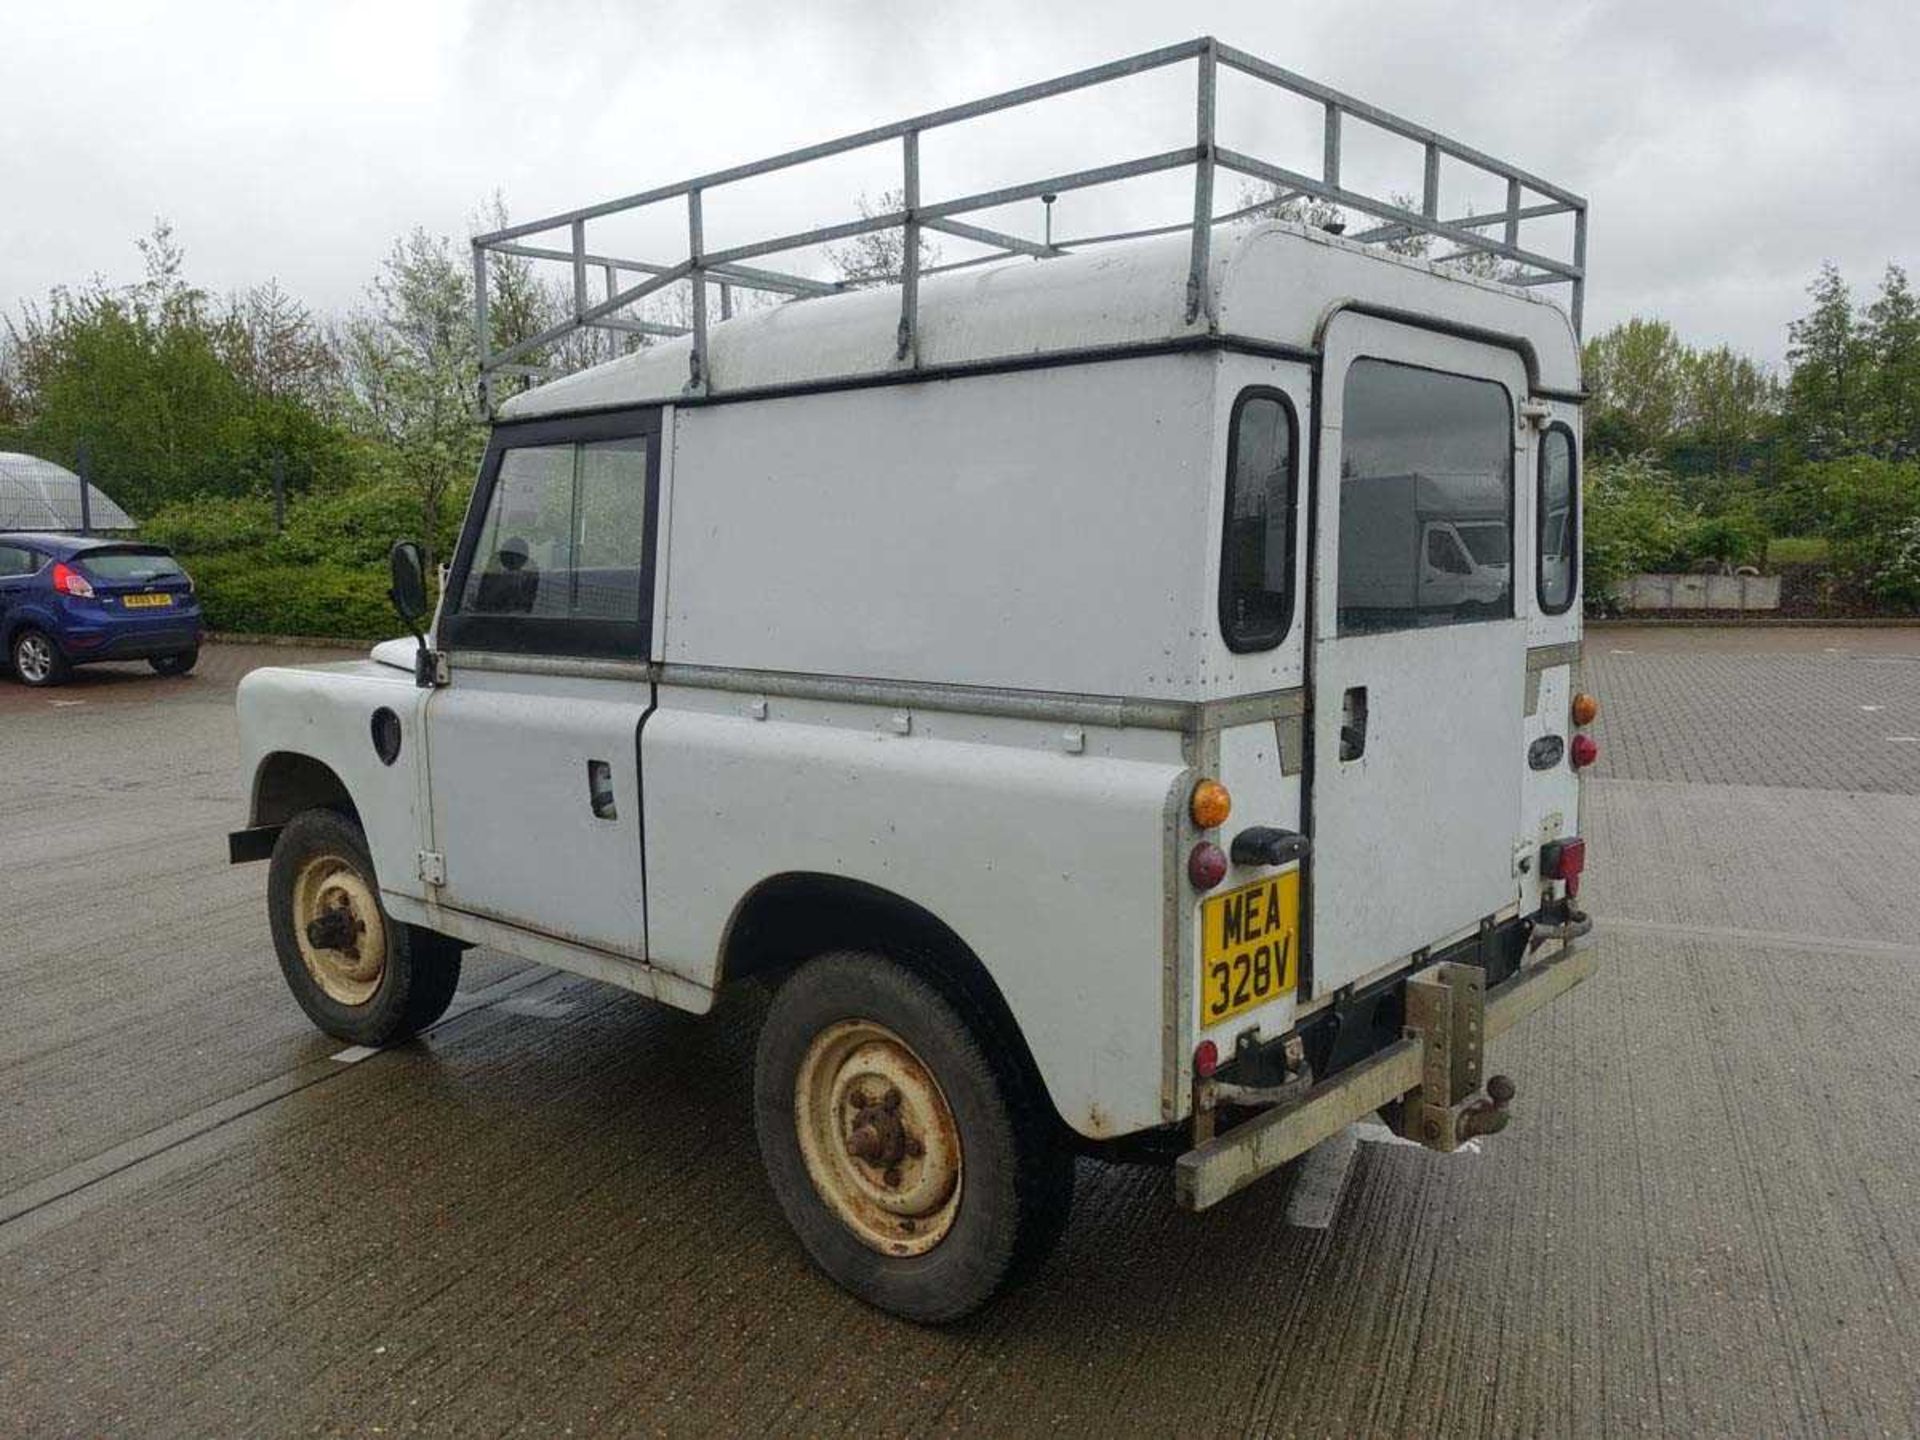 (MEA 328V) 1980 Land Rover Series III in white, 88" light 4x4 utility, Daihatsu 2500cc 4-cylinder - Image 4 of 15